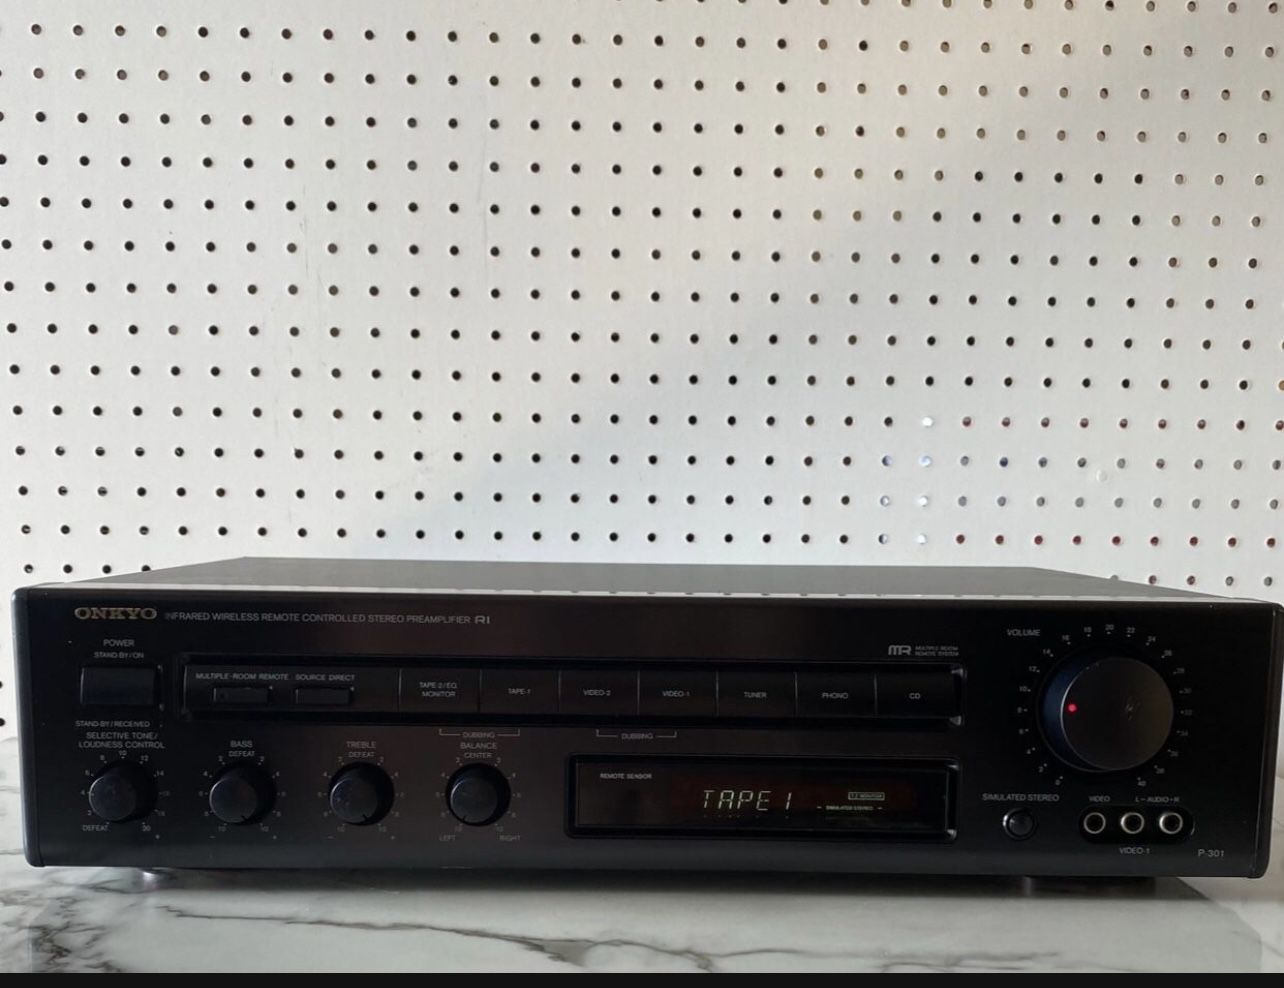 Onkyo Infrared Wireless  Remote Controlled Stereo Preamplifier RI P-301.